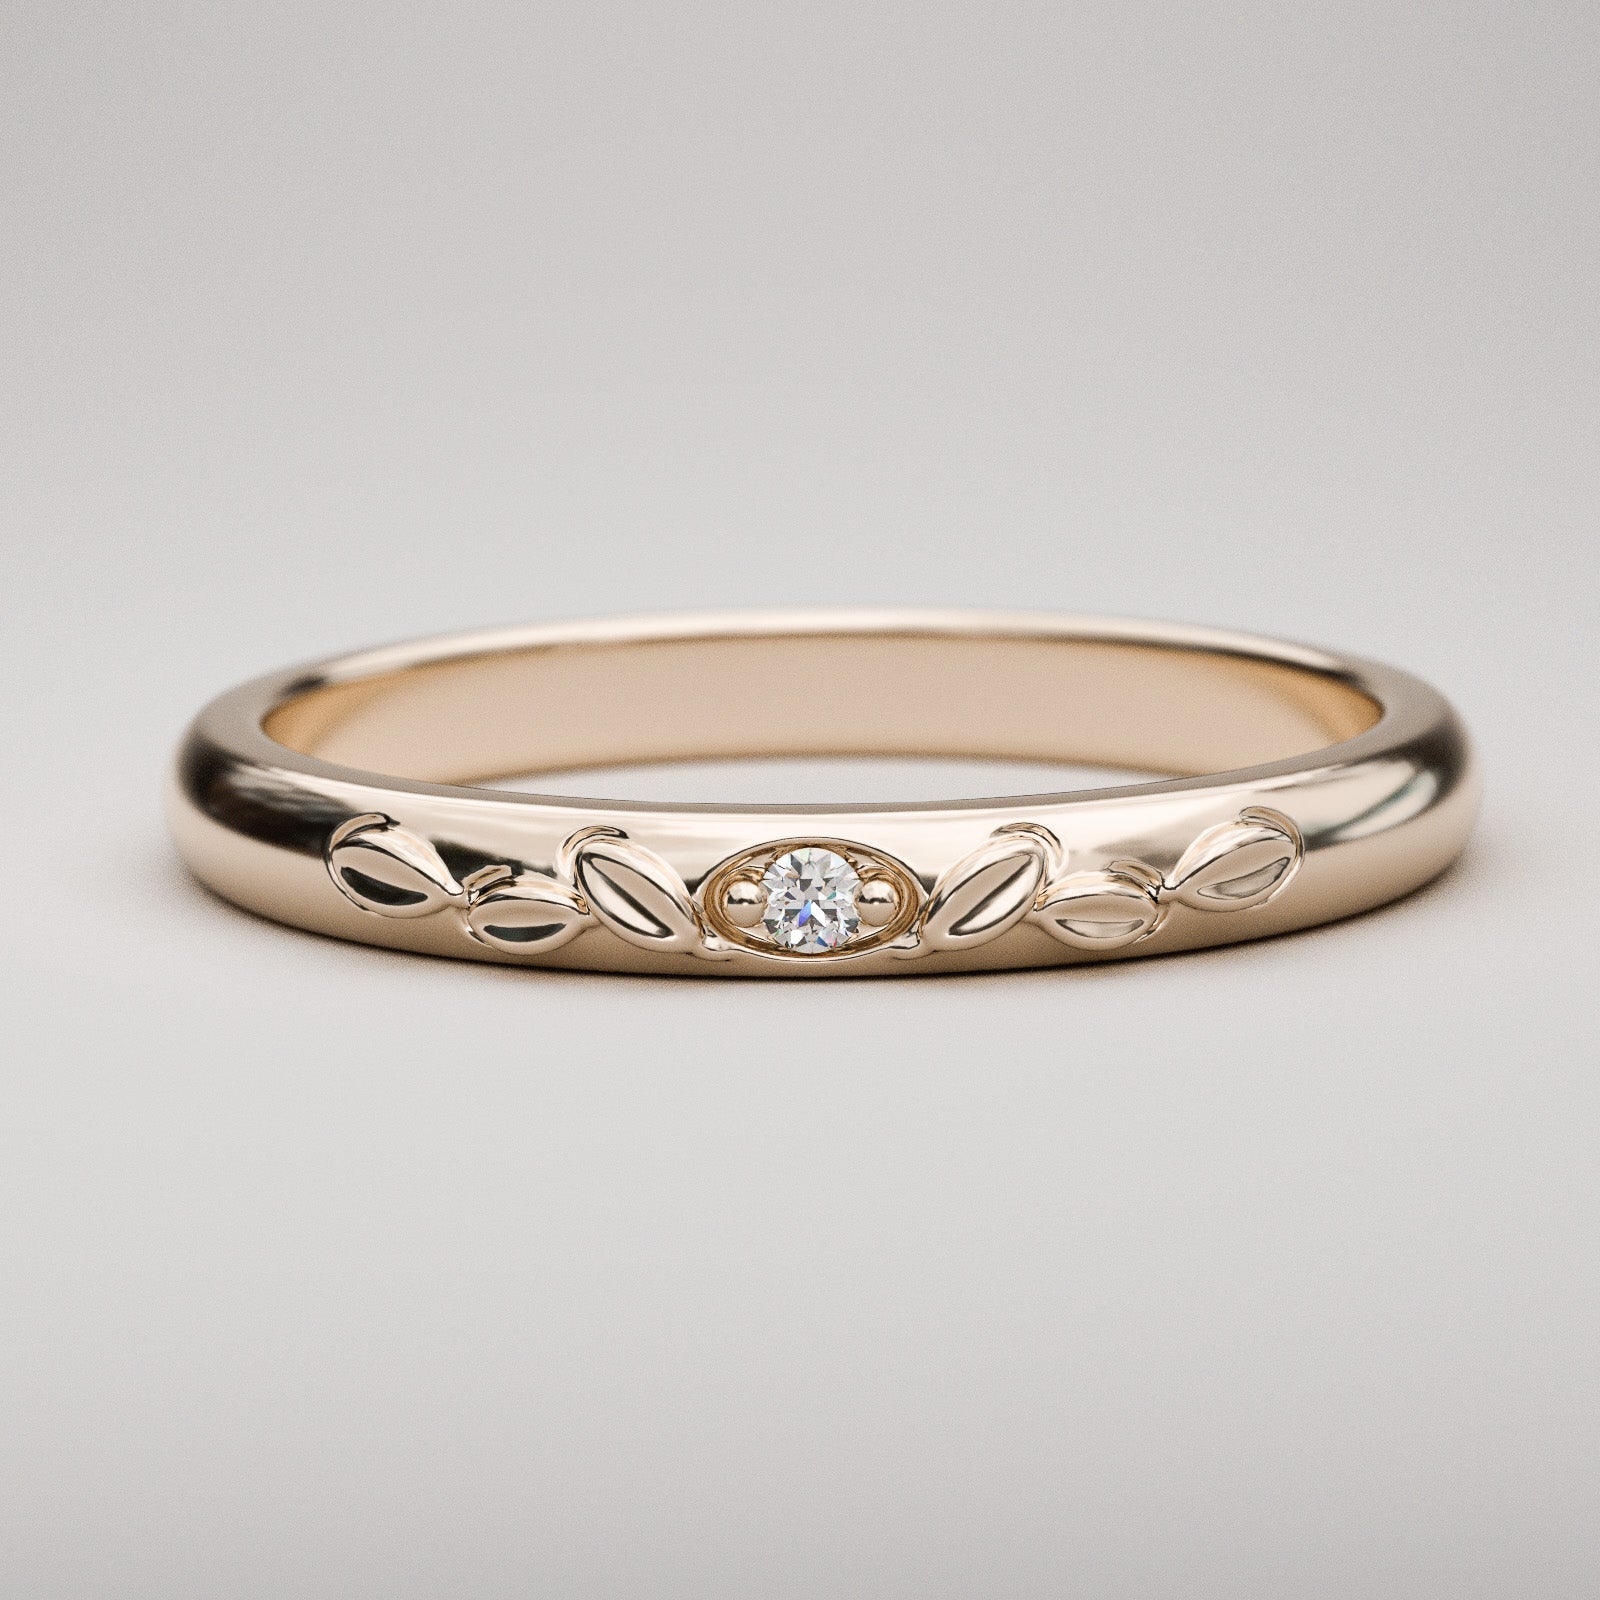 Antique inspired leaves and diamond domed ring in 14k rose gold